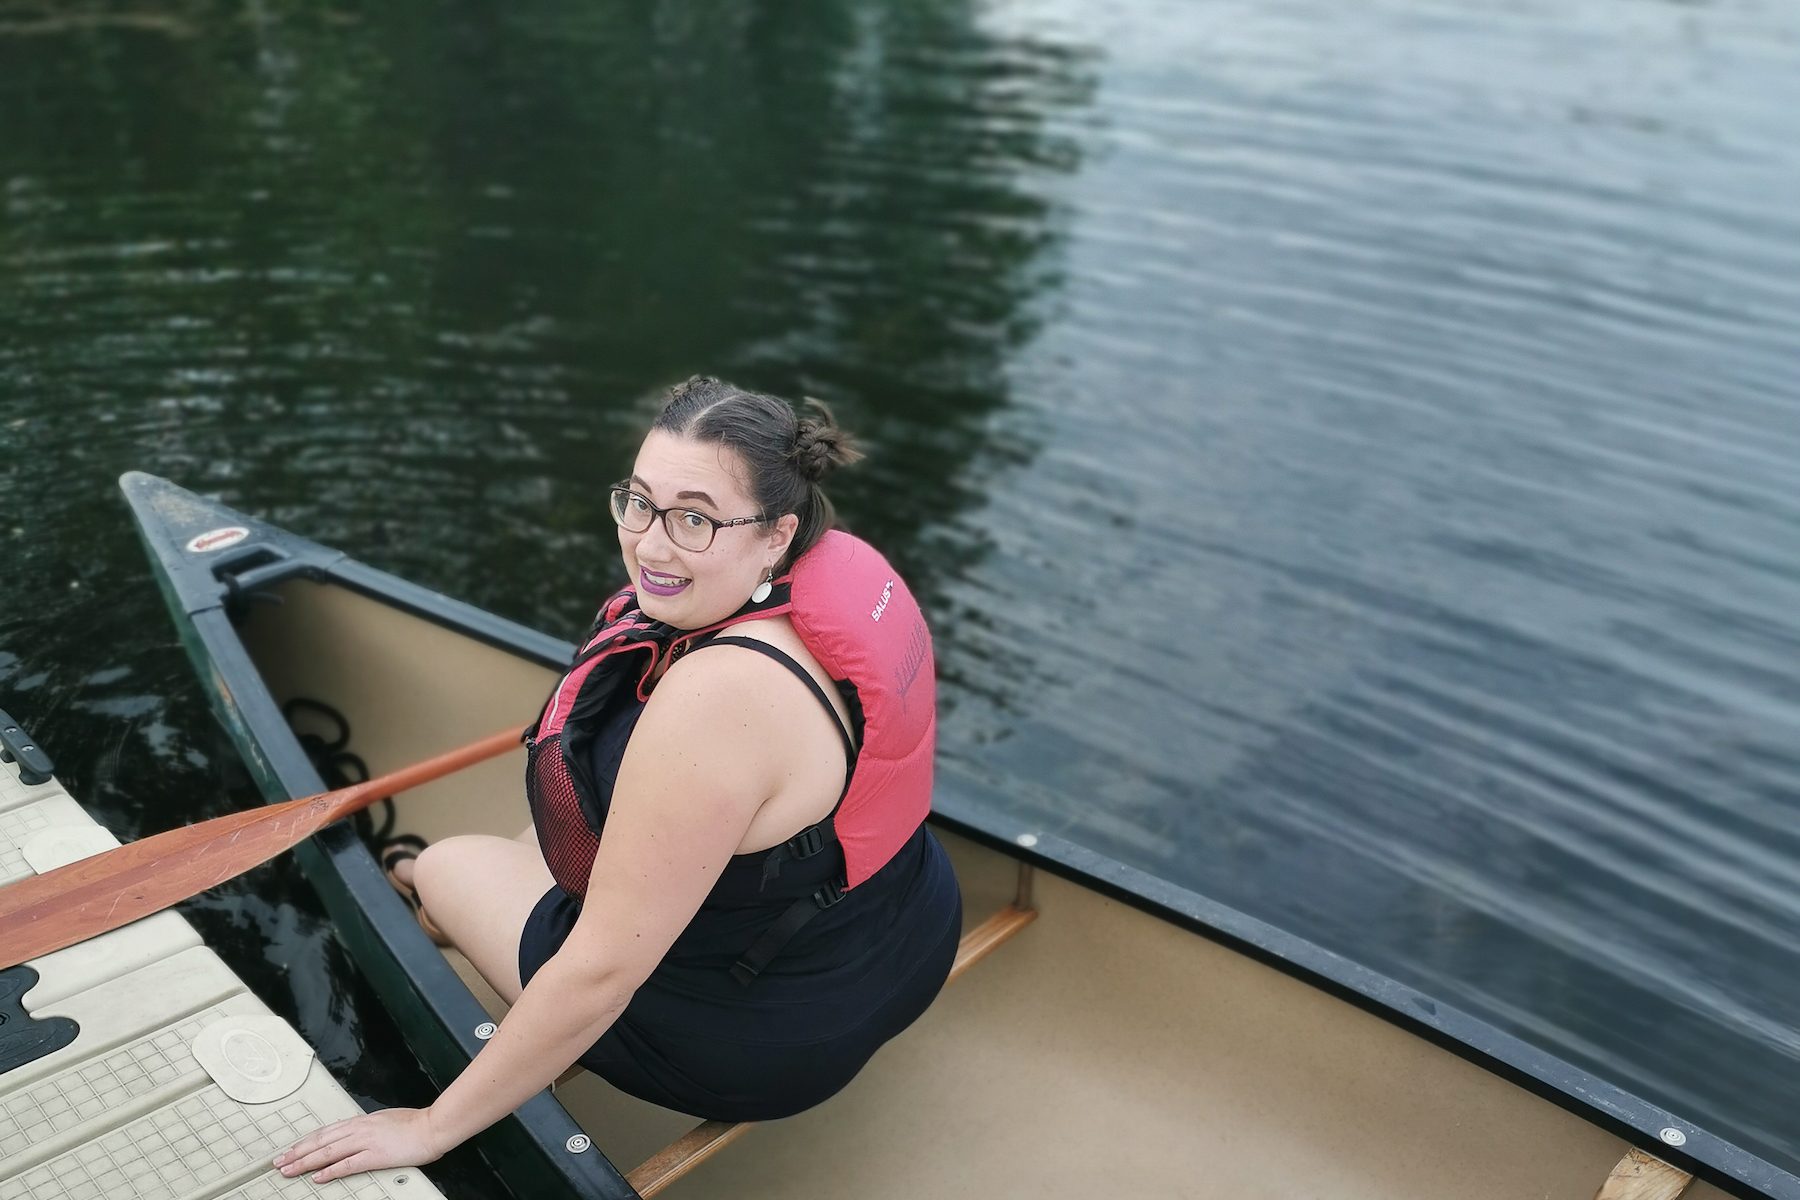 A woman wearing a personal flotation device is seated at the front of a canoe, holding a paddle and looking back over her shoulder towards the camera while bracing herself on a floating dock.